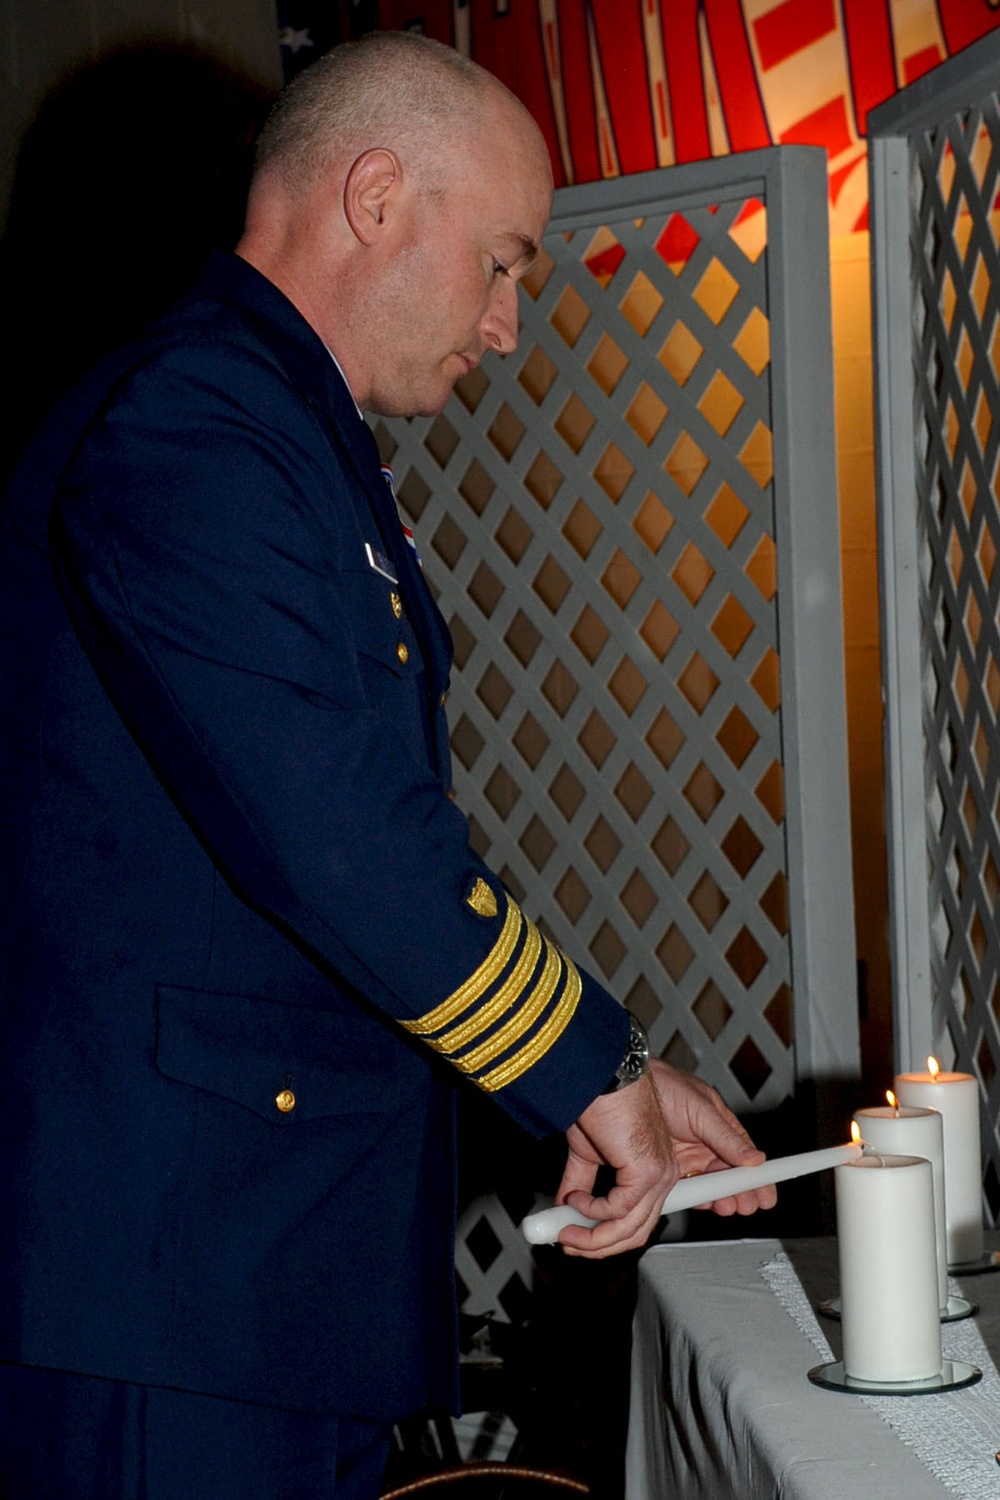 U.S. Coast Guard member Capt. Mahoney, lights a candle for his branch of service during the Veterans Day ceremony Nov. 4. The Niners Citizen's Club hosted the event at the South Norfolk Community Recreation Center to honor all active duty and retired mili